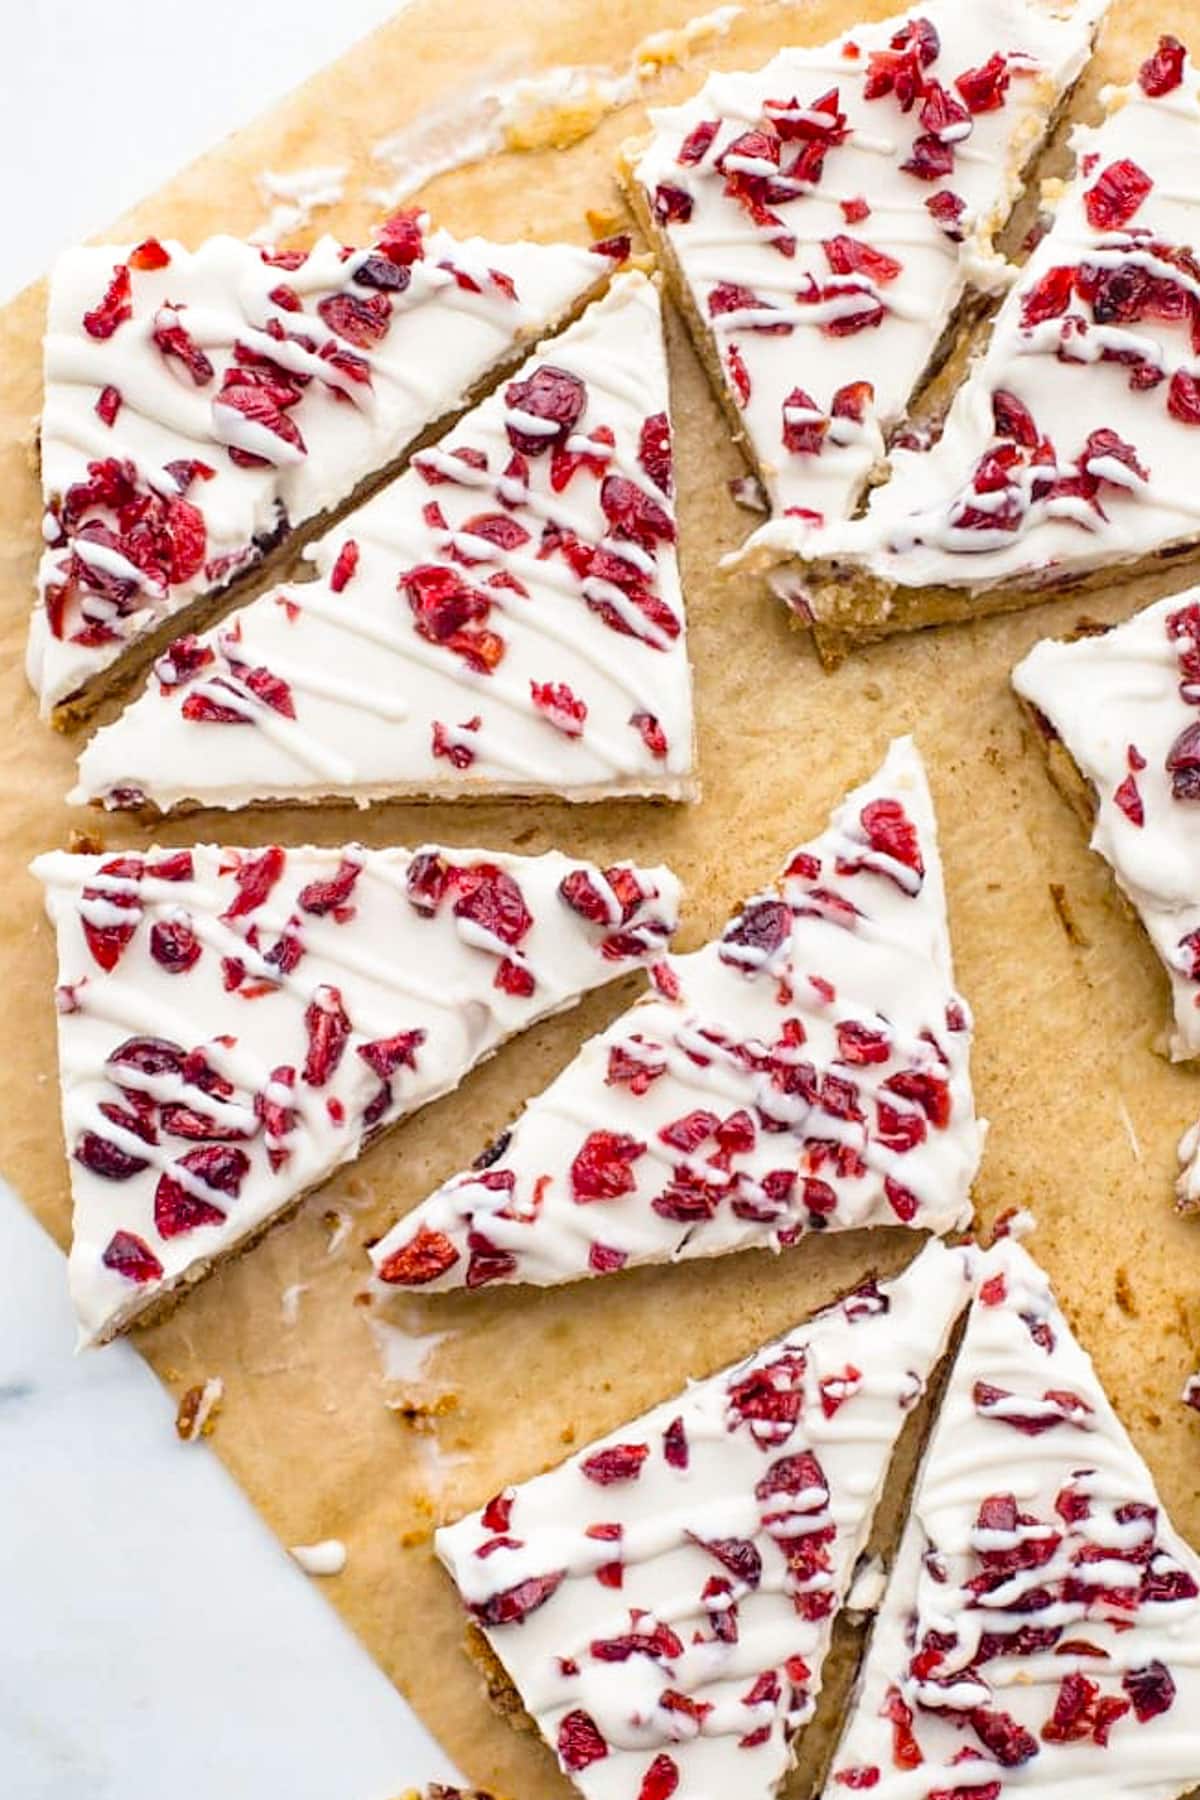 Overhead photo showing triangular cranberry bliss bars spread on a counter, partially on a piece of parchment paper.